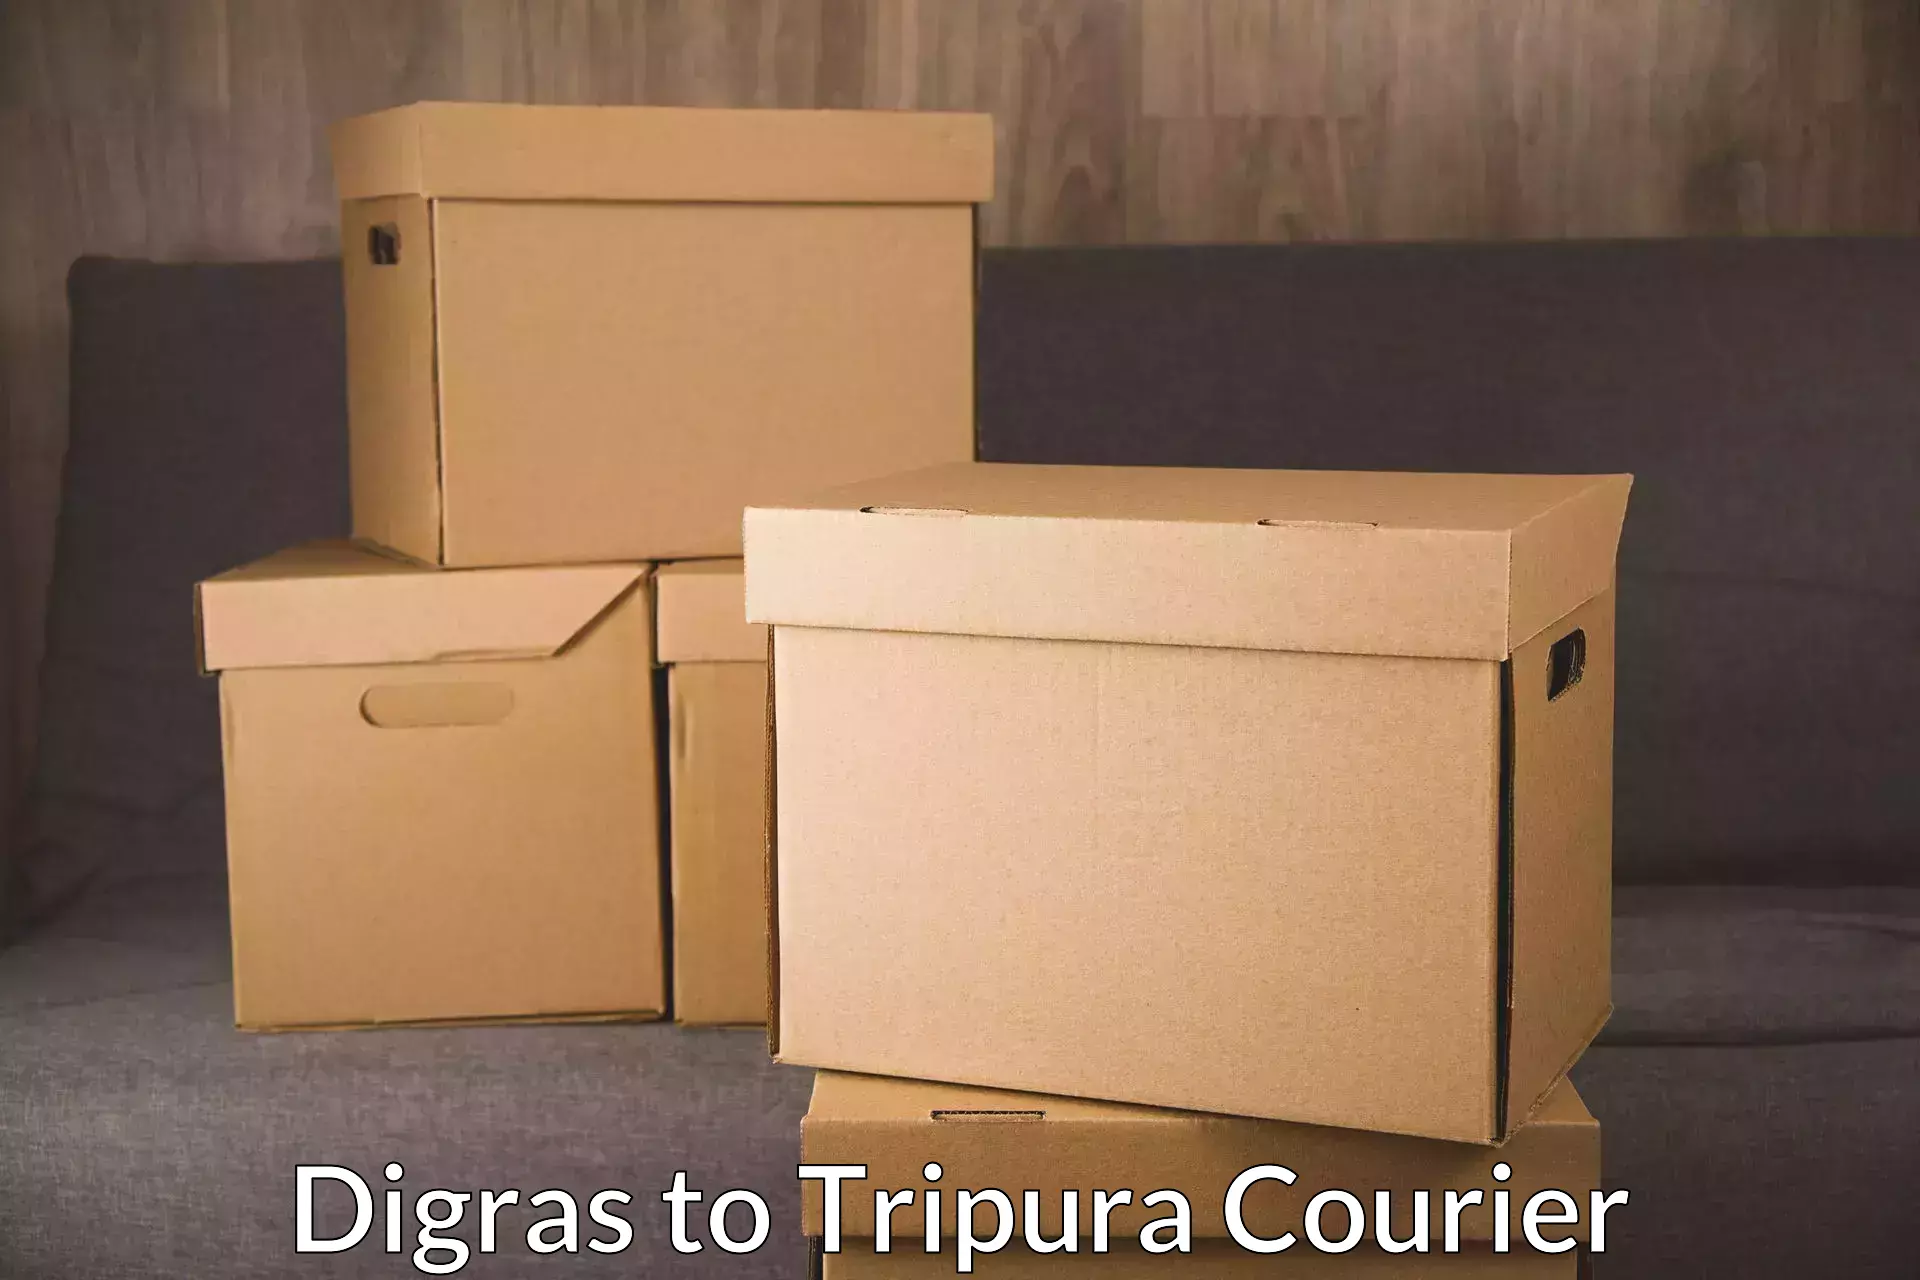 Supply chain efficiency Digras to Tripura